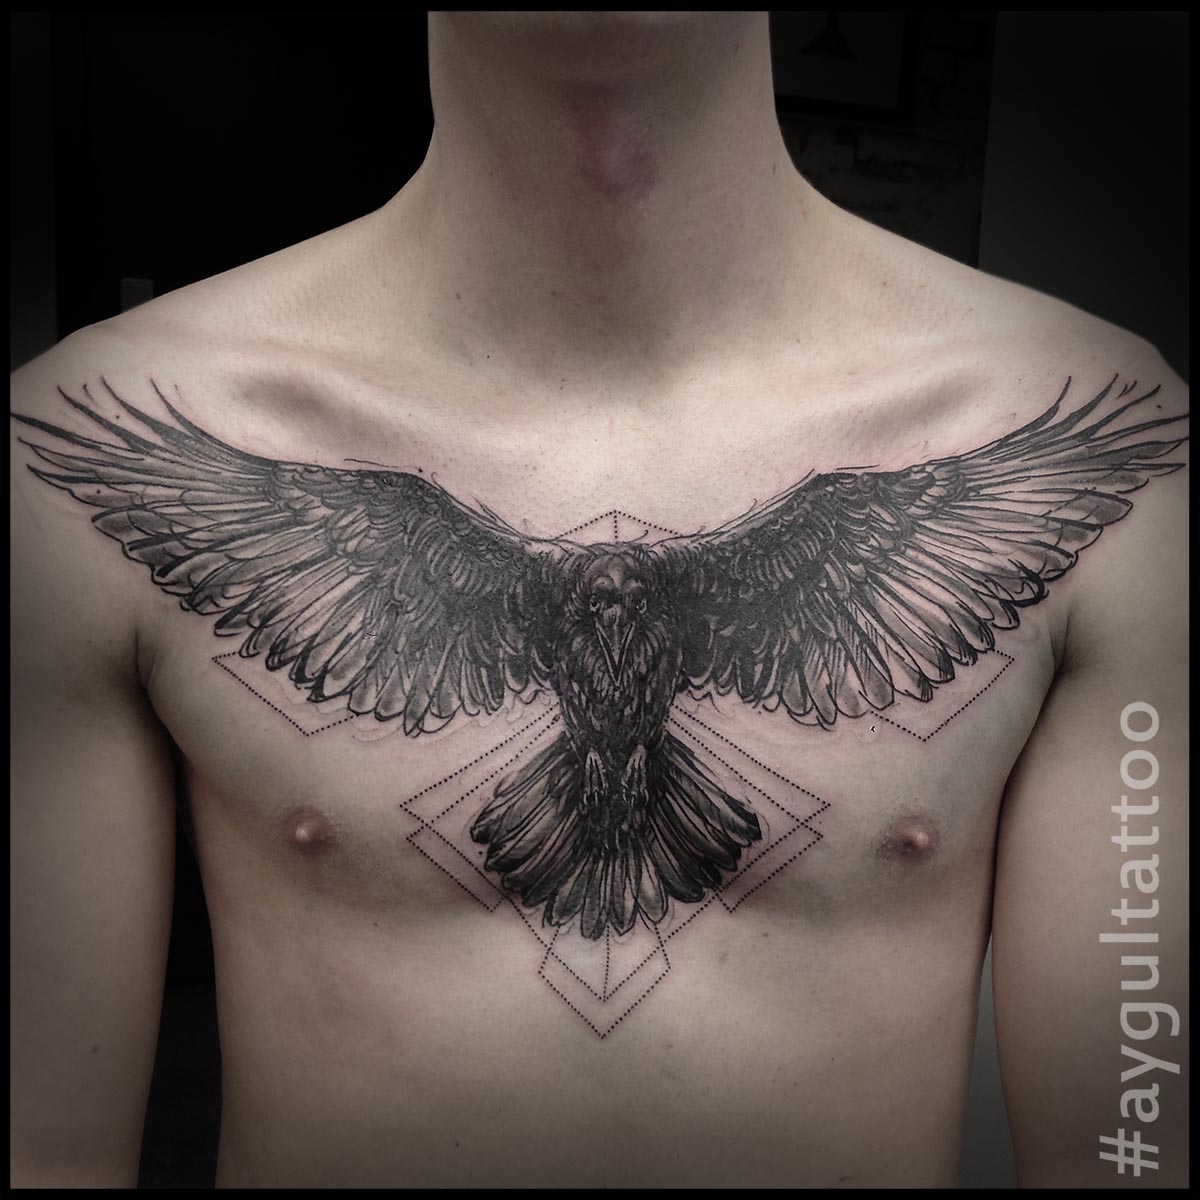 New raven chest piece Done by TonyJusticeTattoo out of Bamboo Studio  Toronto Complete in 2 days  rtattoos